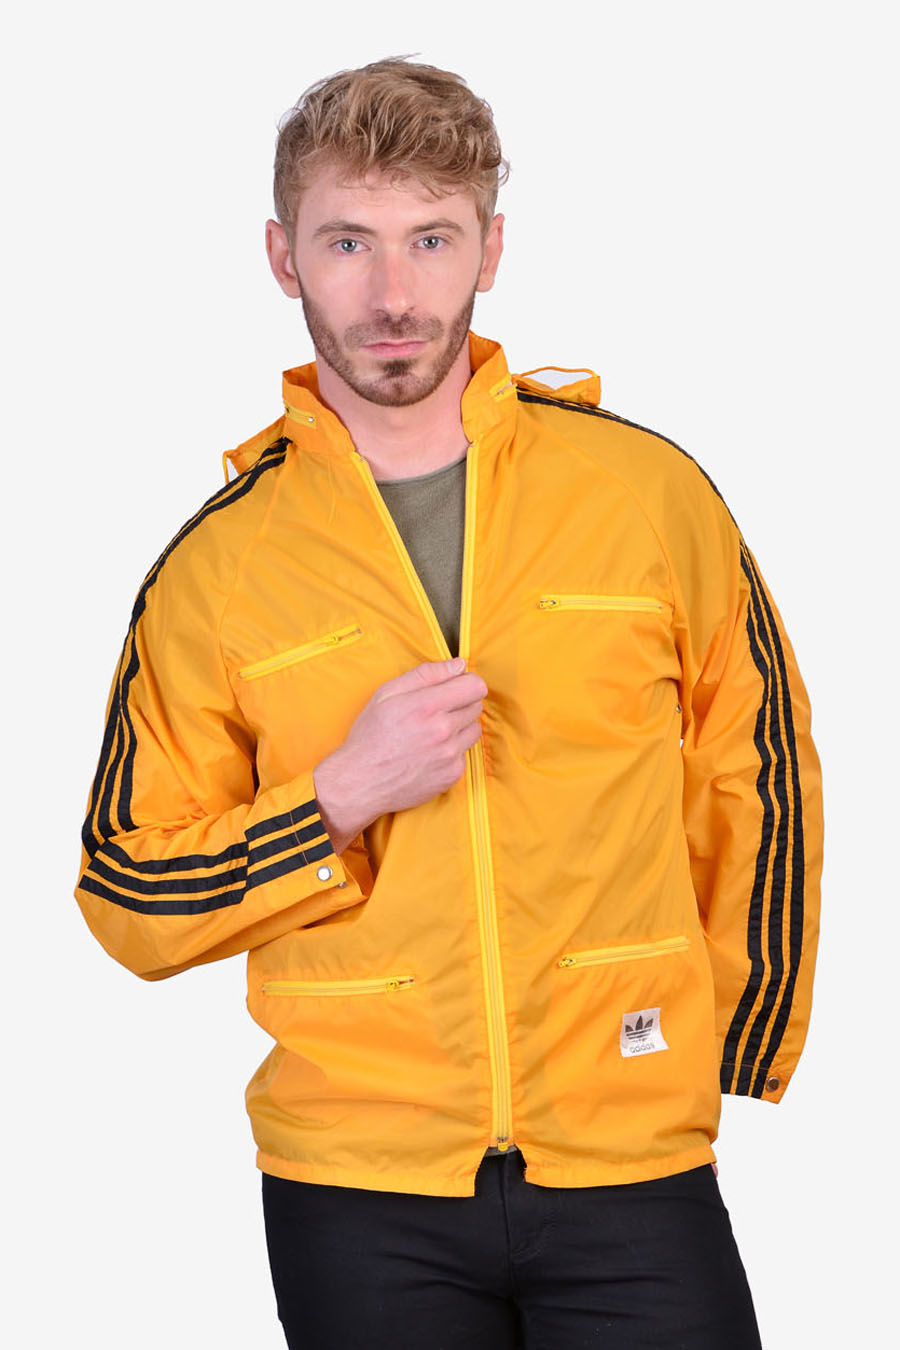 Adidas 1970s drizzler jacket